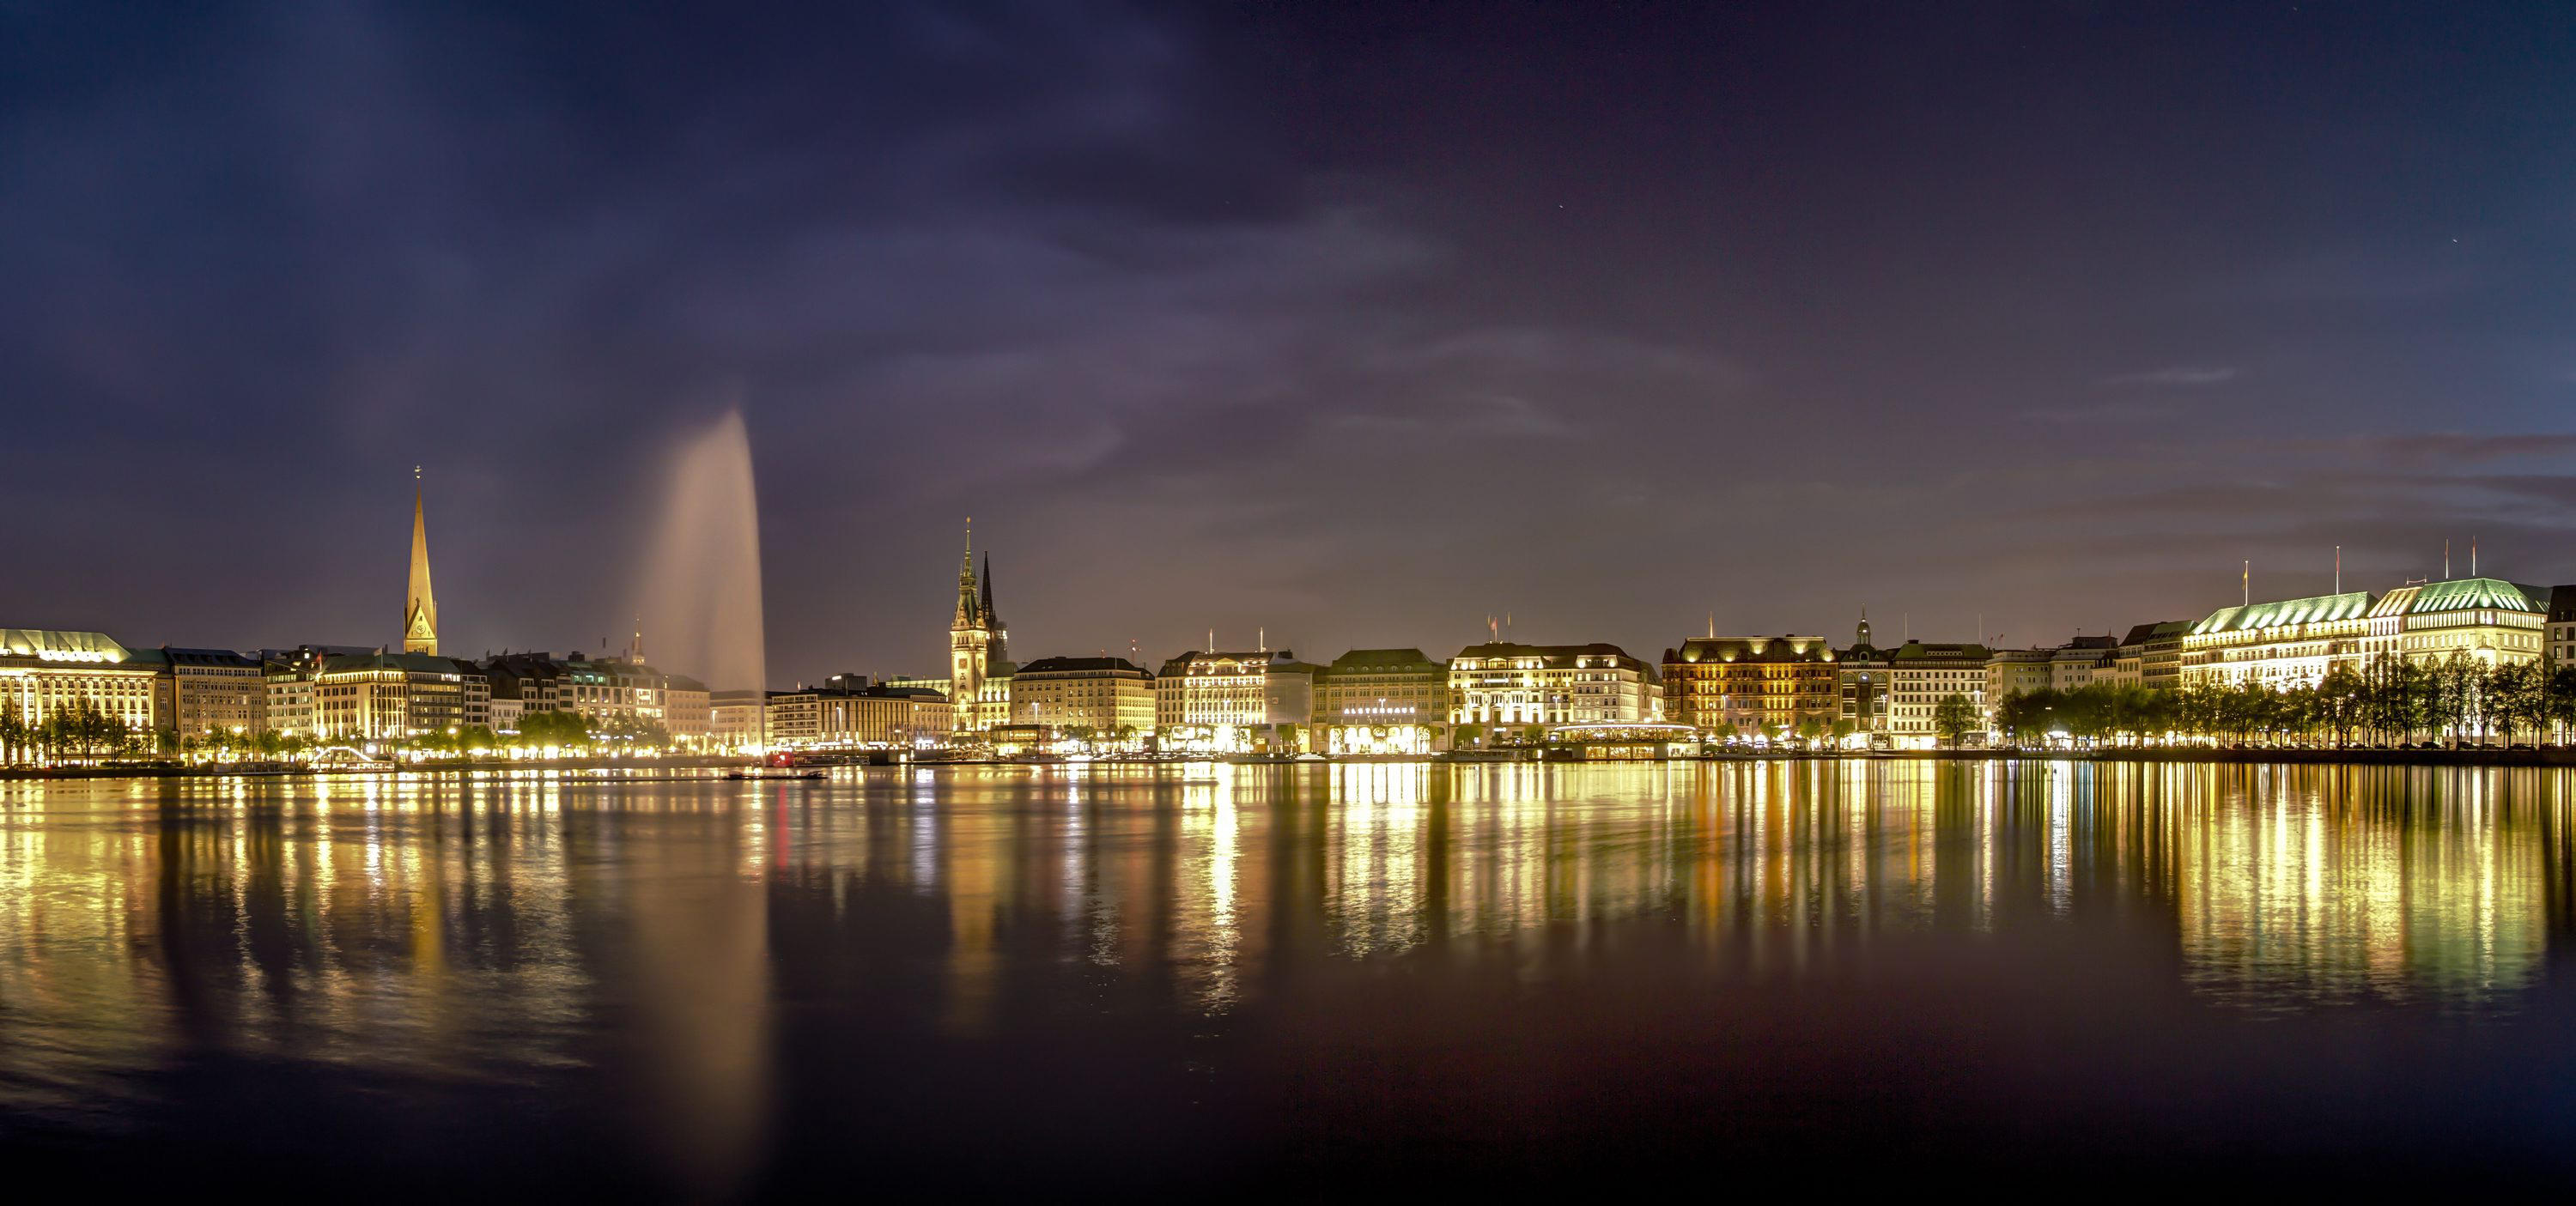 The Inner Alster In Hamburg At Night By Wallunica - Reflection , HD Wallpaper & Backgrounds